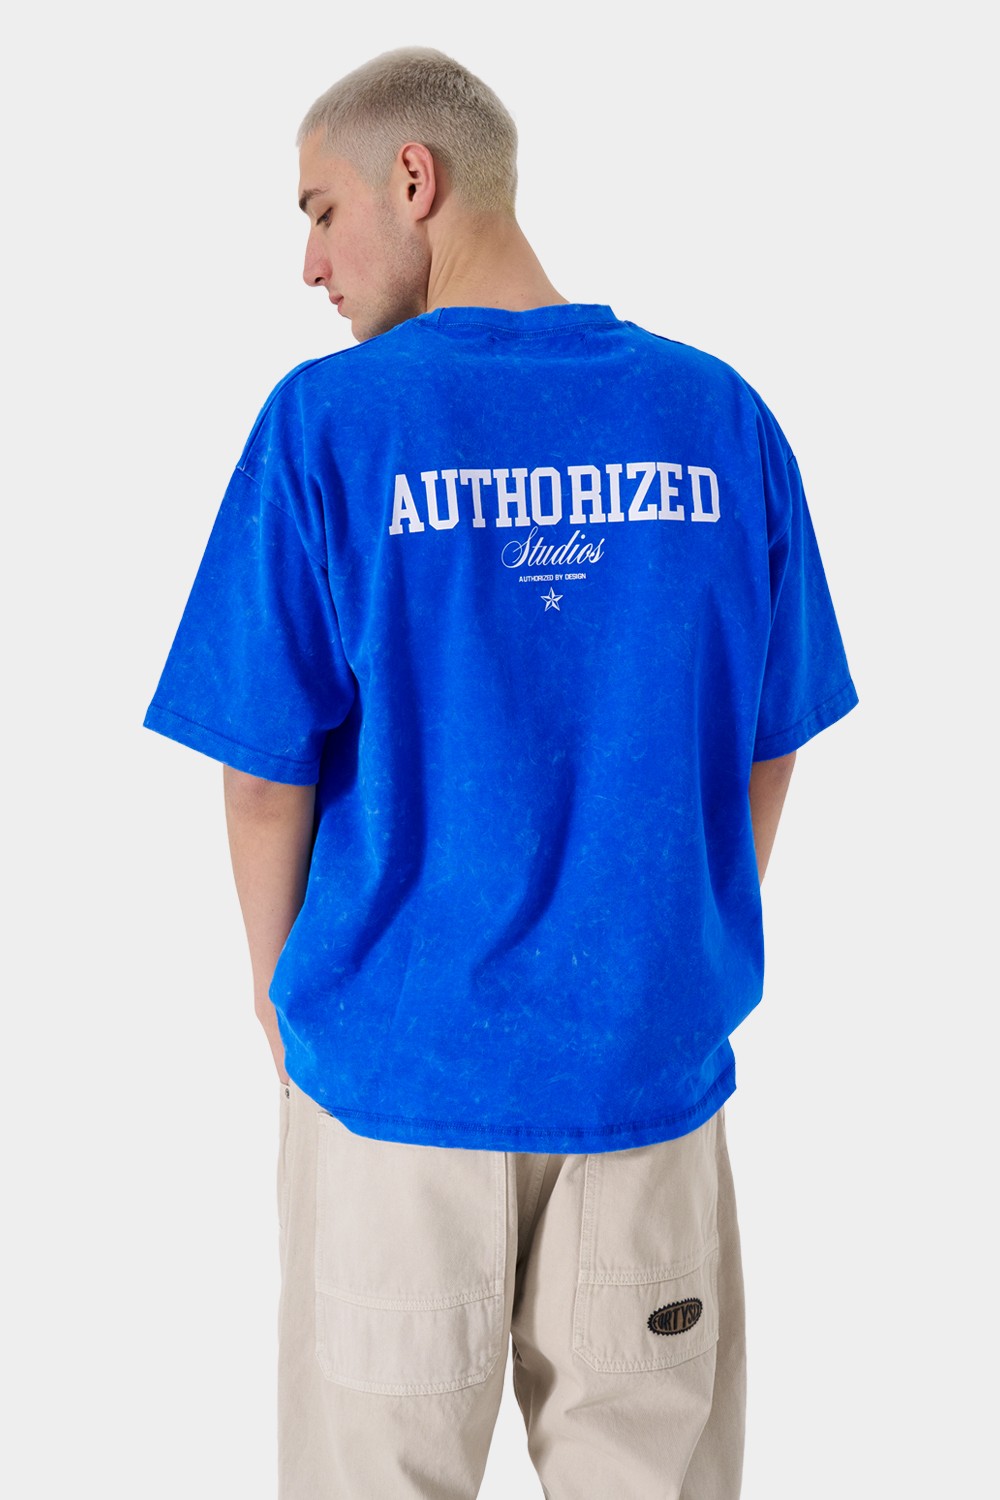 Authorized Studio Graphic Washed T-Shirt (ATH-6)